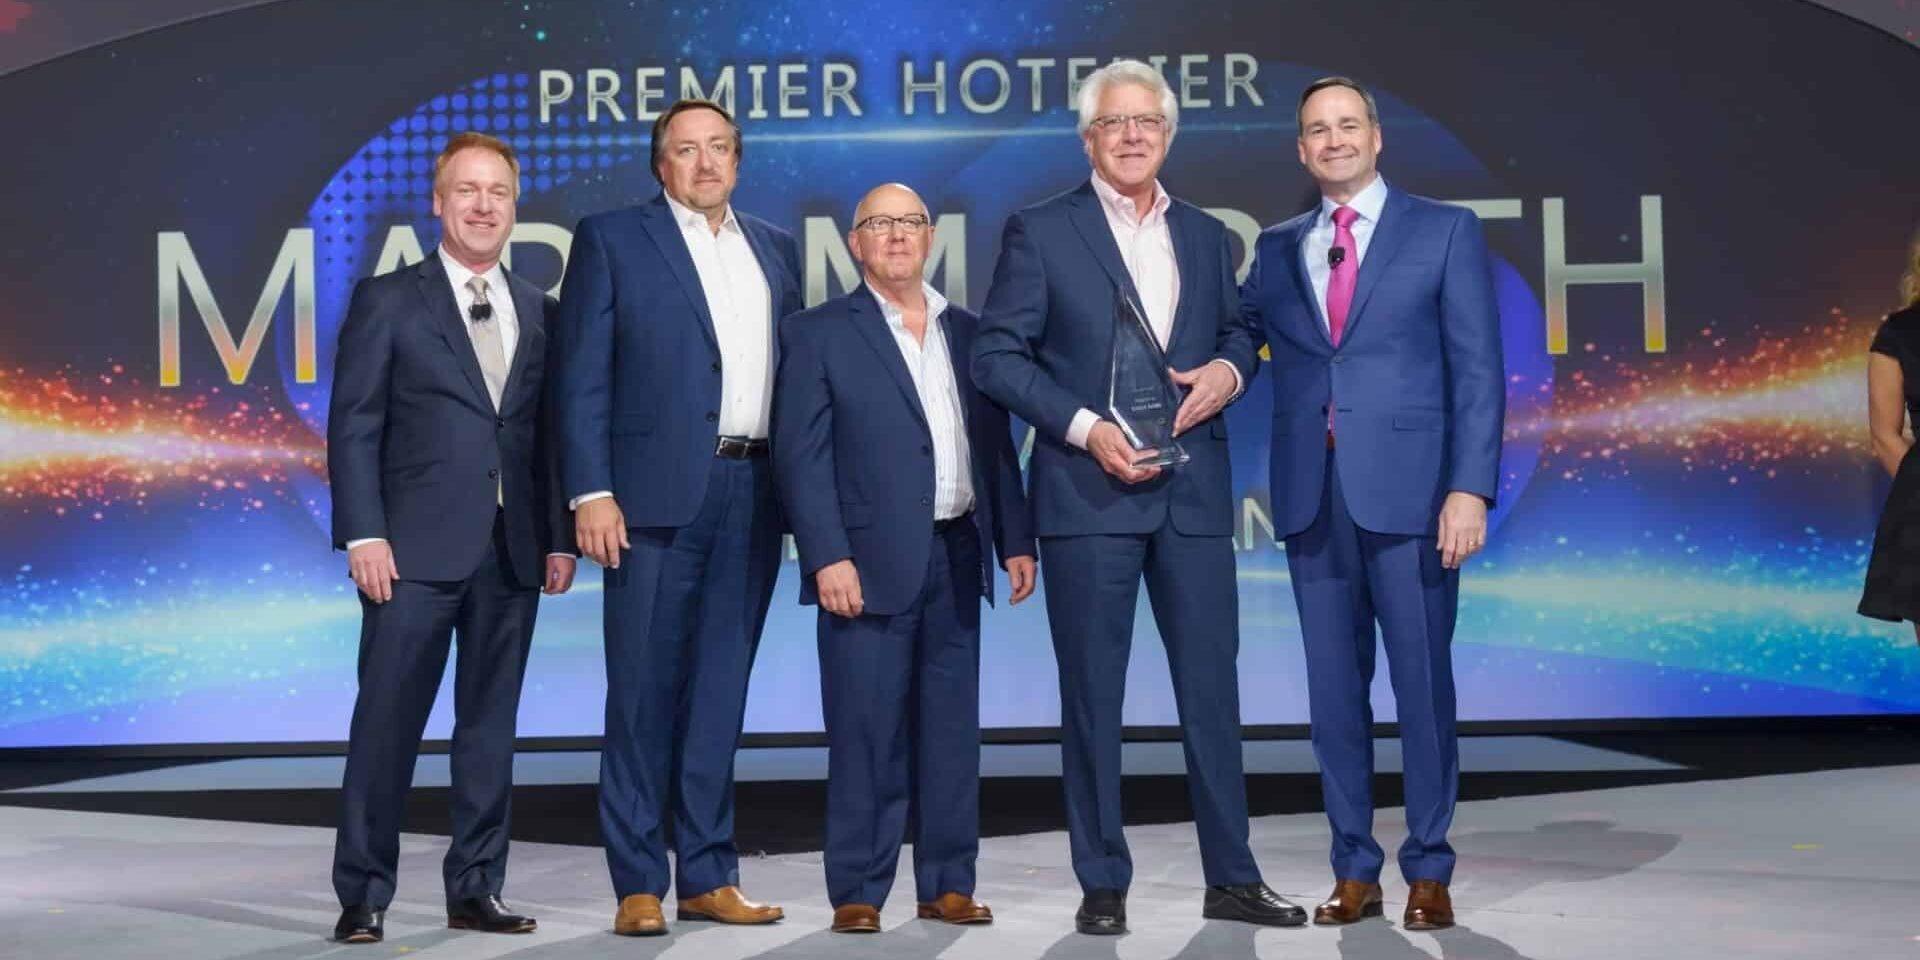 press release, hotelier of the year